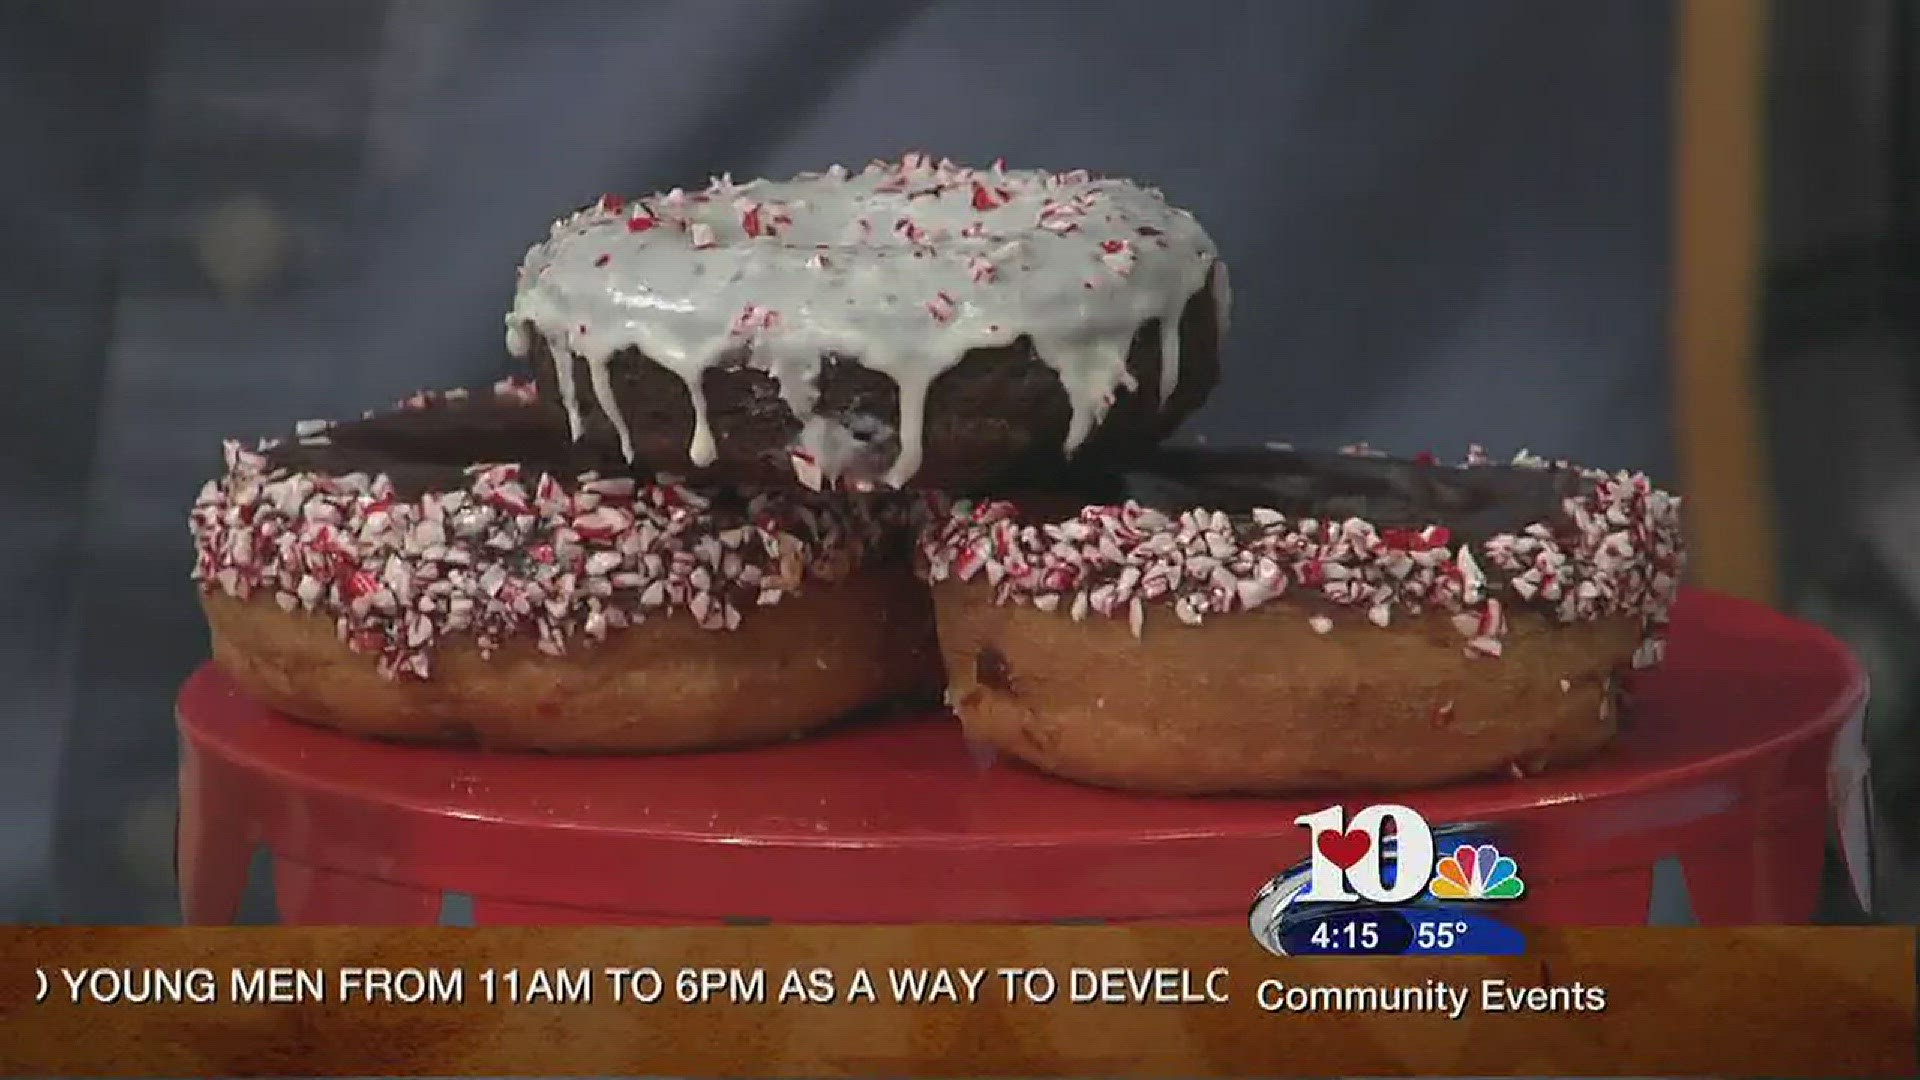 Live at Five at 4December 23, 2016The folks with Makers Donuts and Remedy coffee share some ways to serve up these holiday treats to your family, mastgeneralstore.com